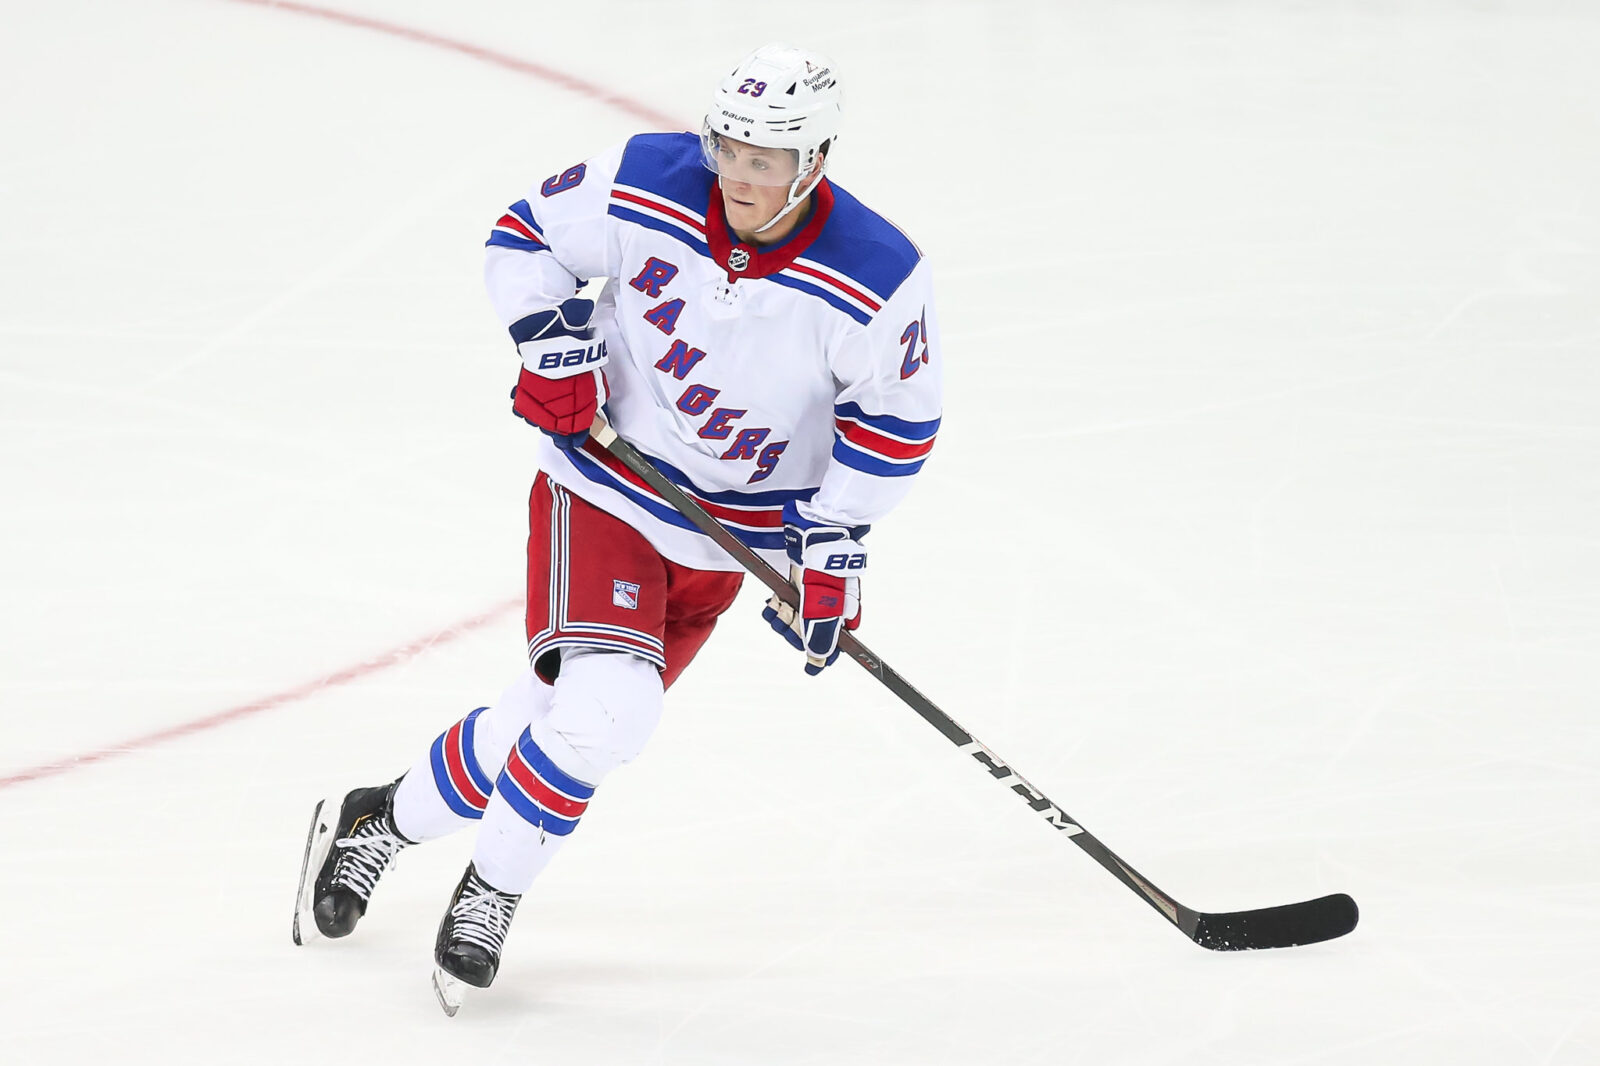 Unlike last year, the Rangers 4th line has strong options